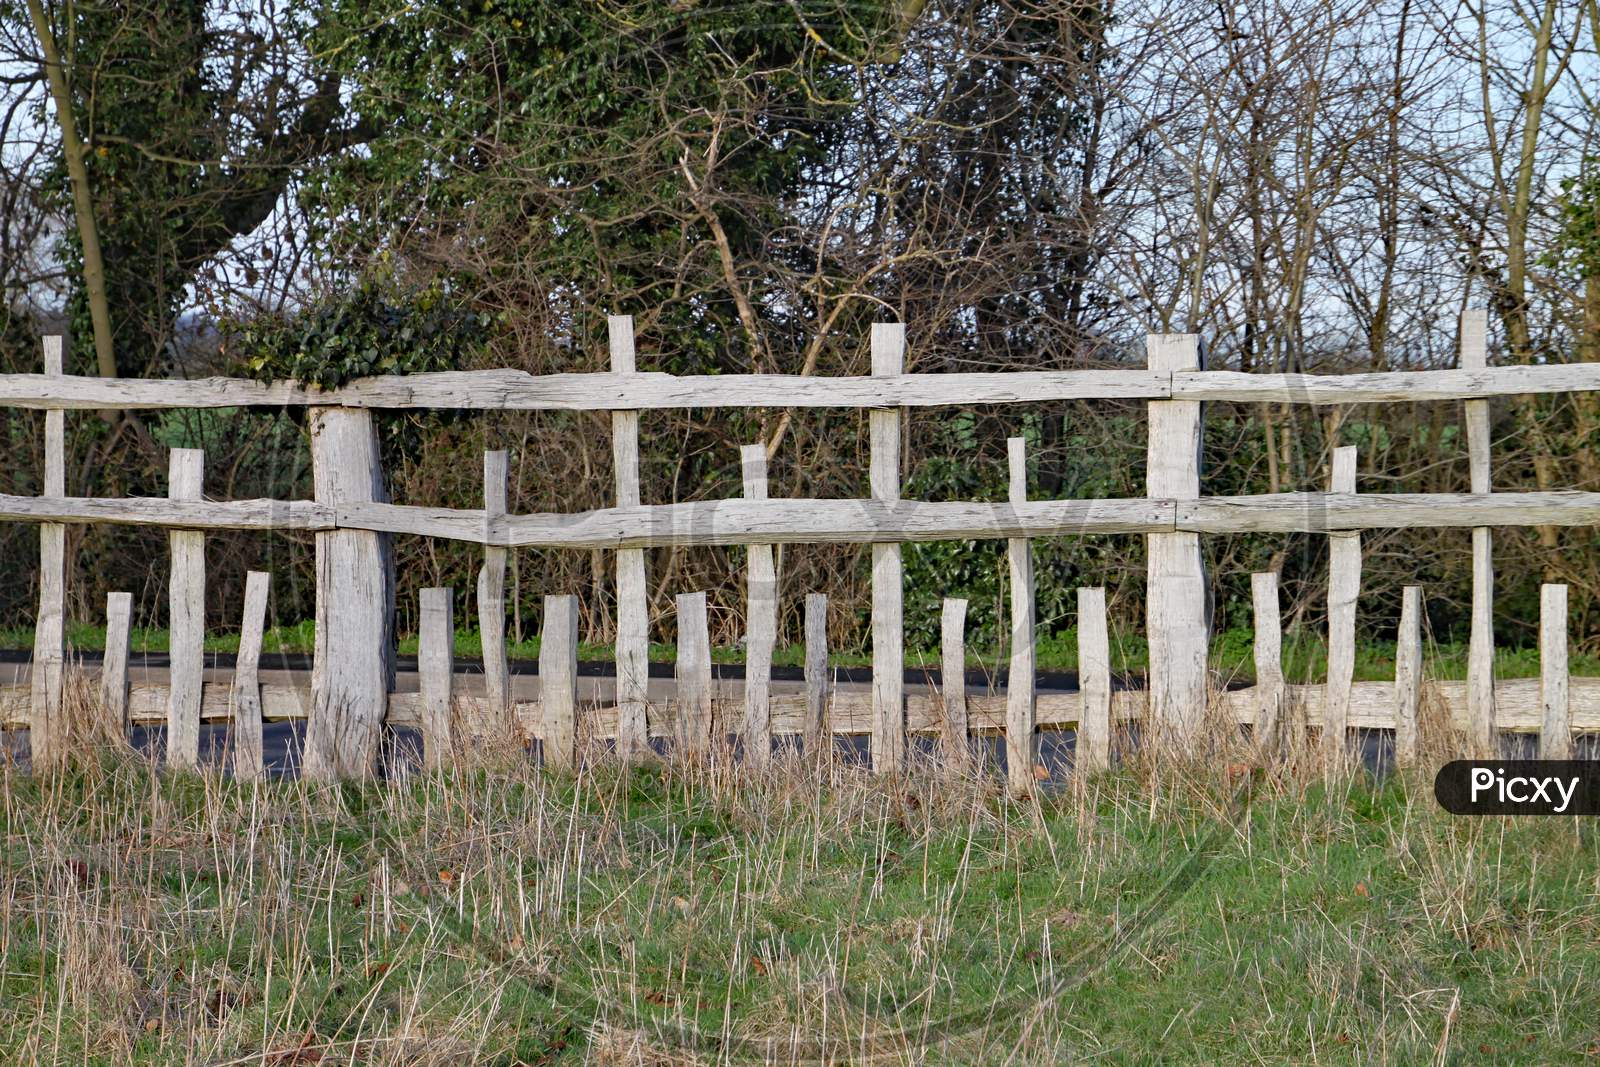 Unusual Wooden Fence With Parallel Horizontal Rails And Vertical Posts Of Different Lengths In A Pattern